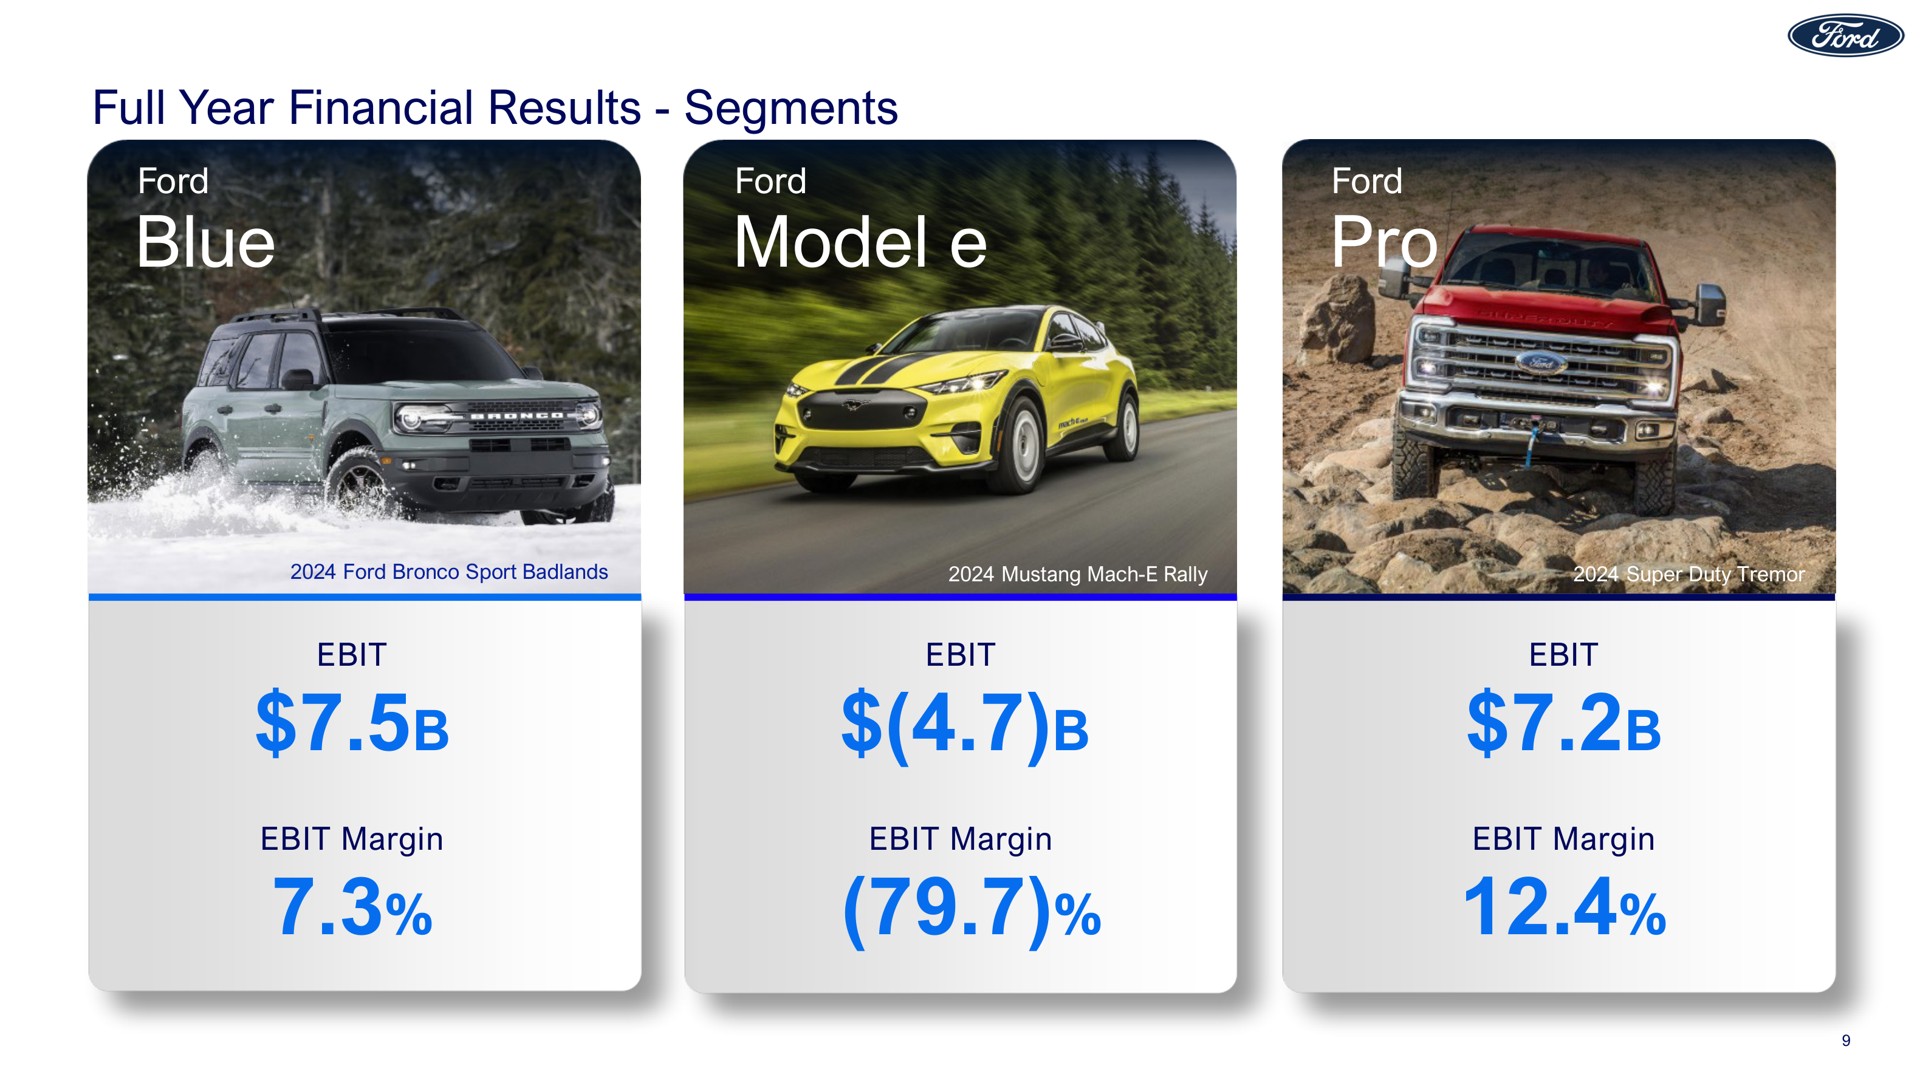 full year financial results segments ford blue ford model ford pro | Ford